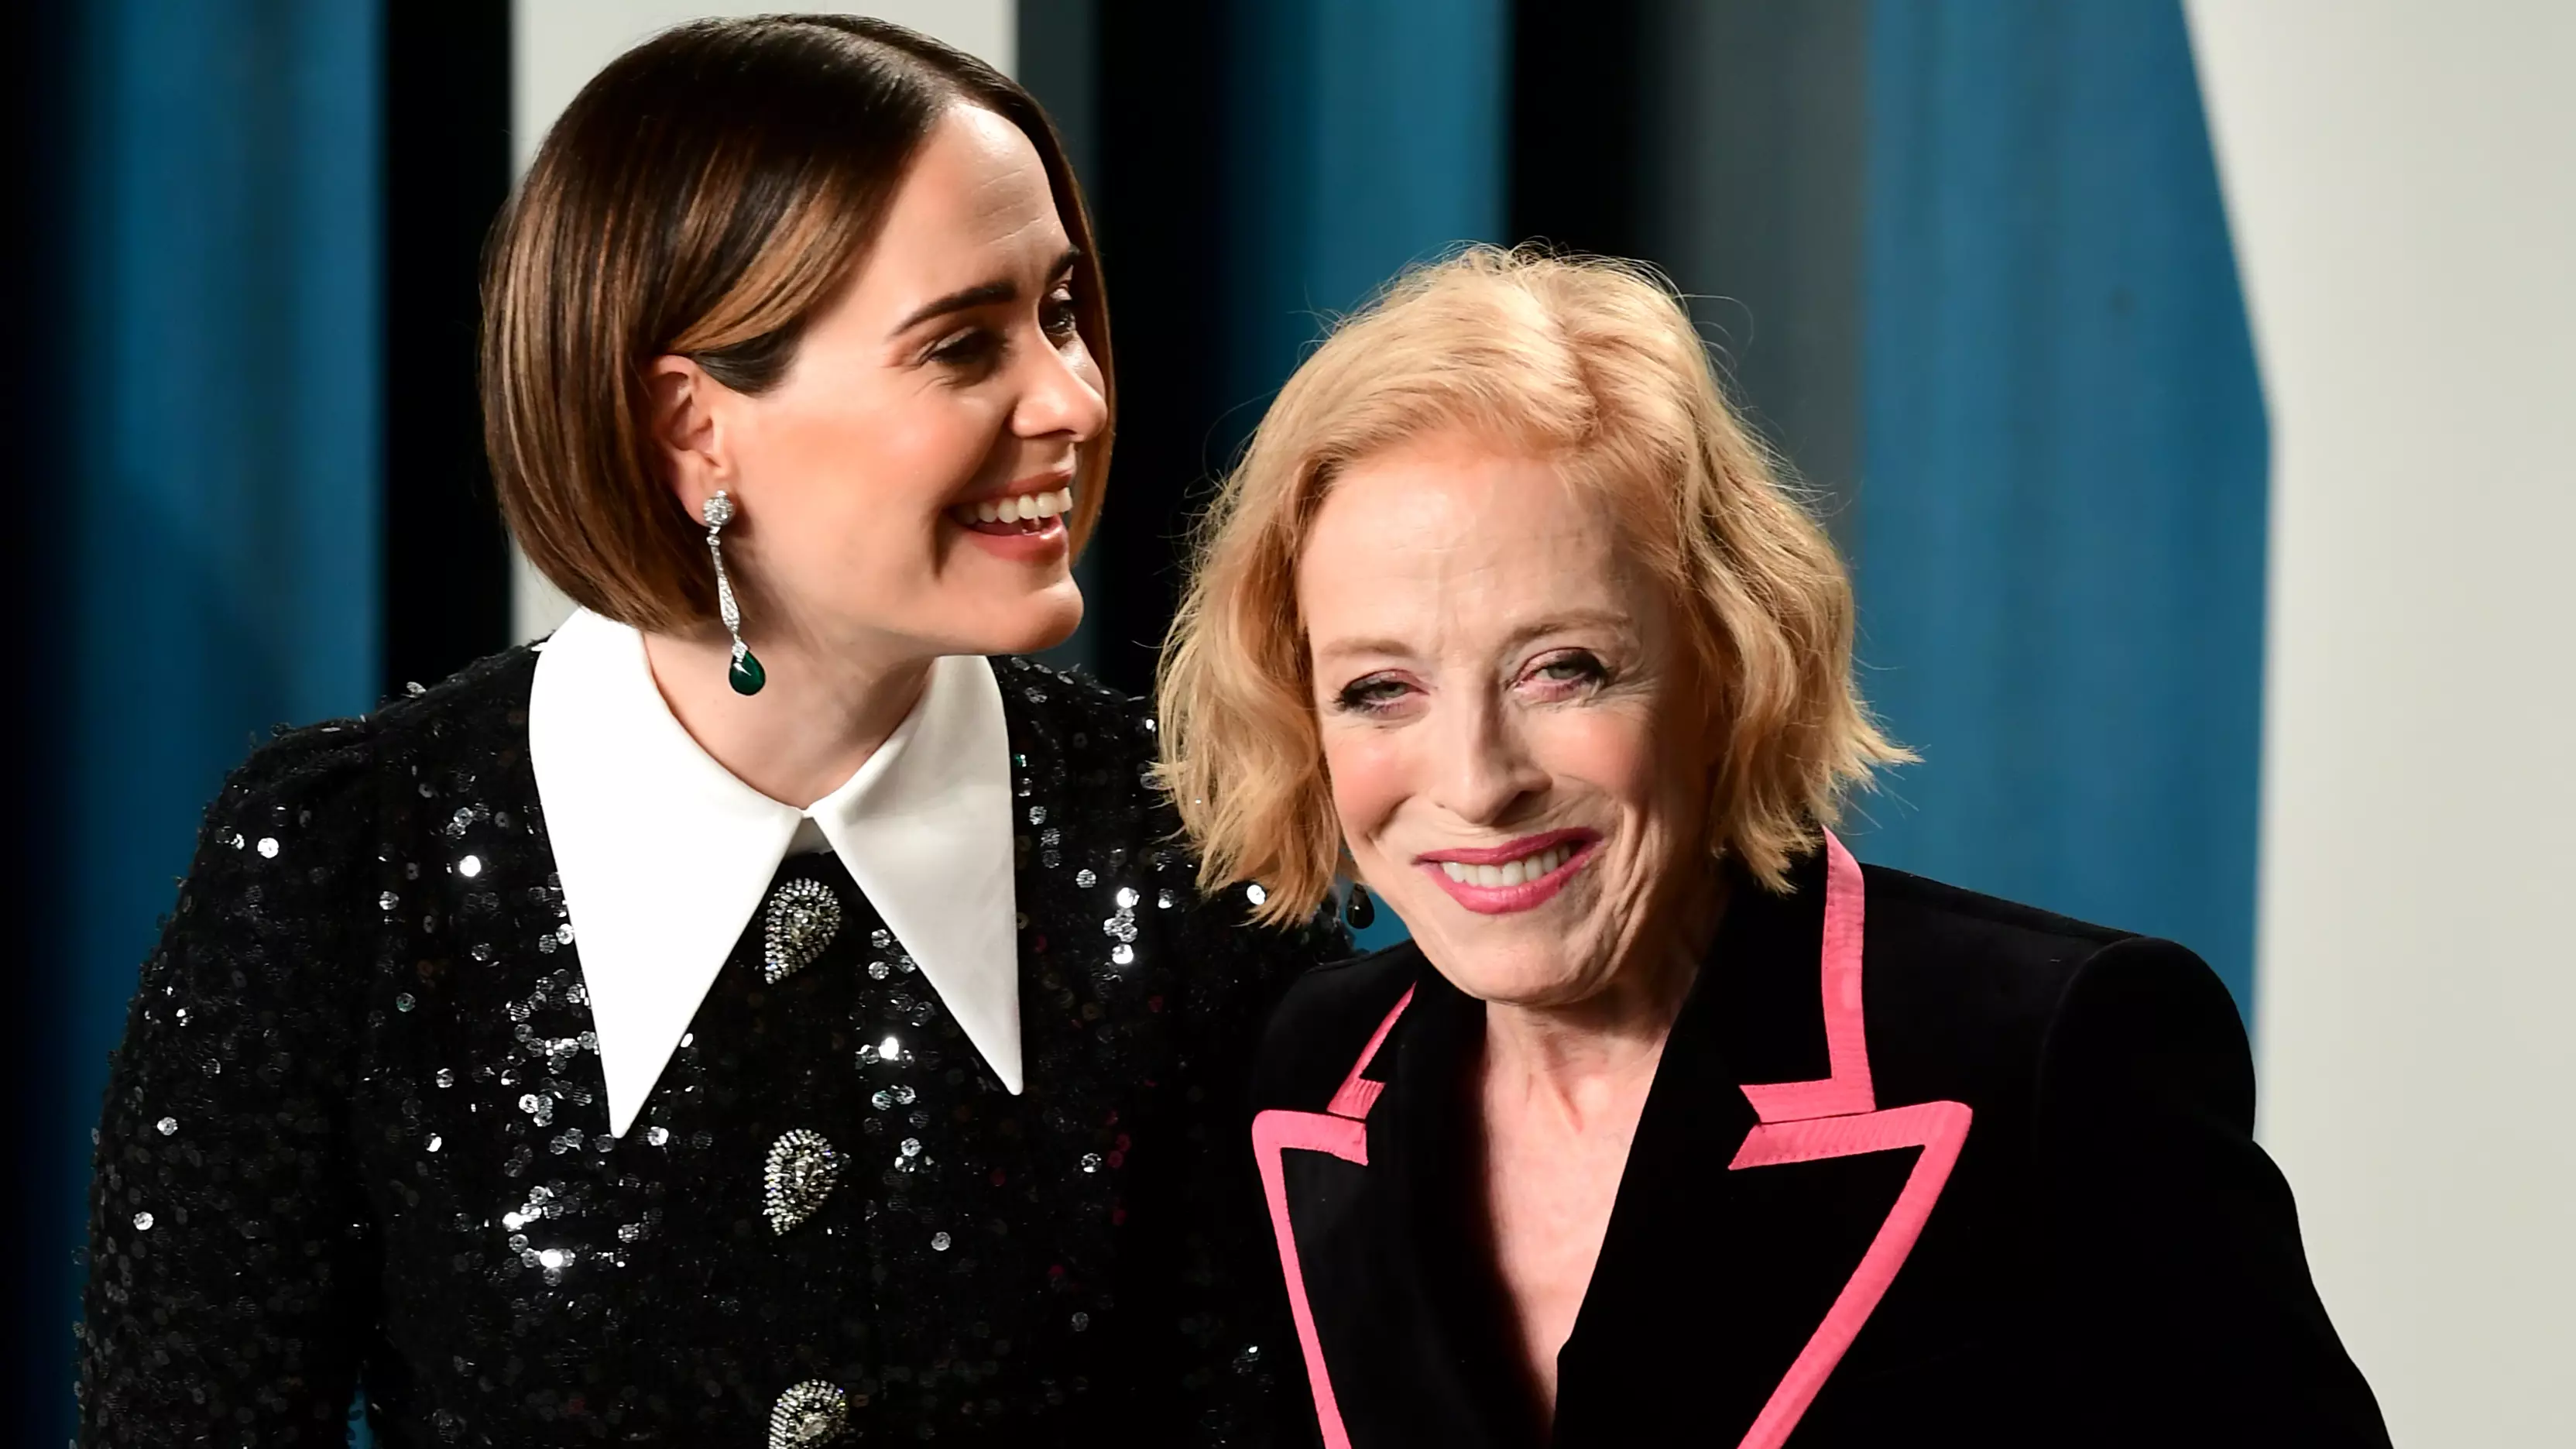 Sarah Paulson Opens Up On 'Cruel' Comments About Her Relationship With Holland Taylor